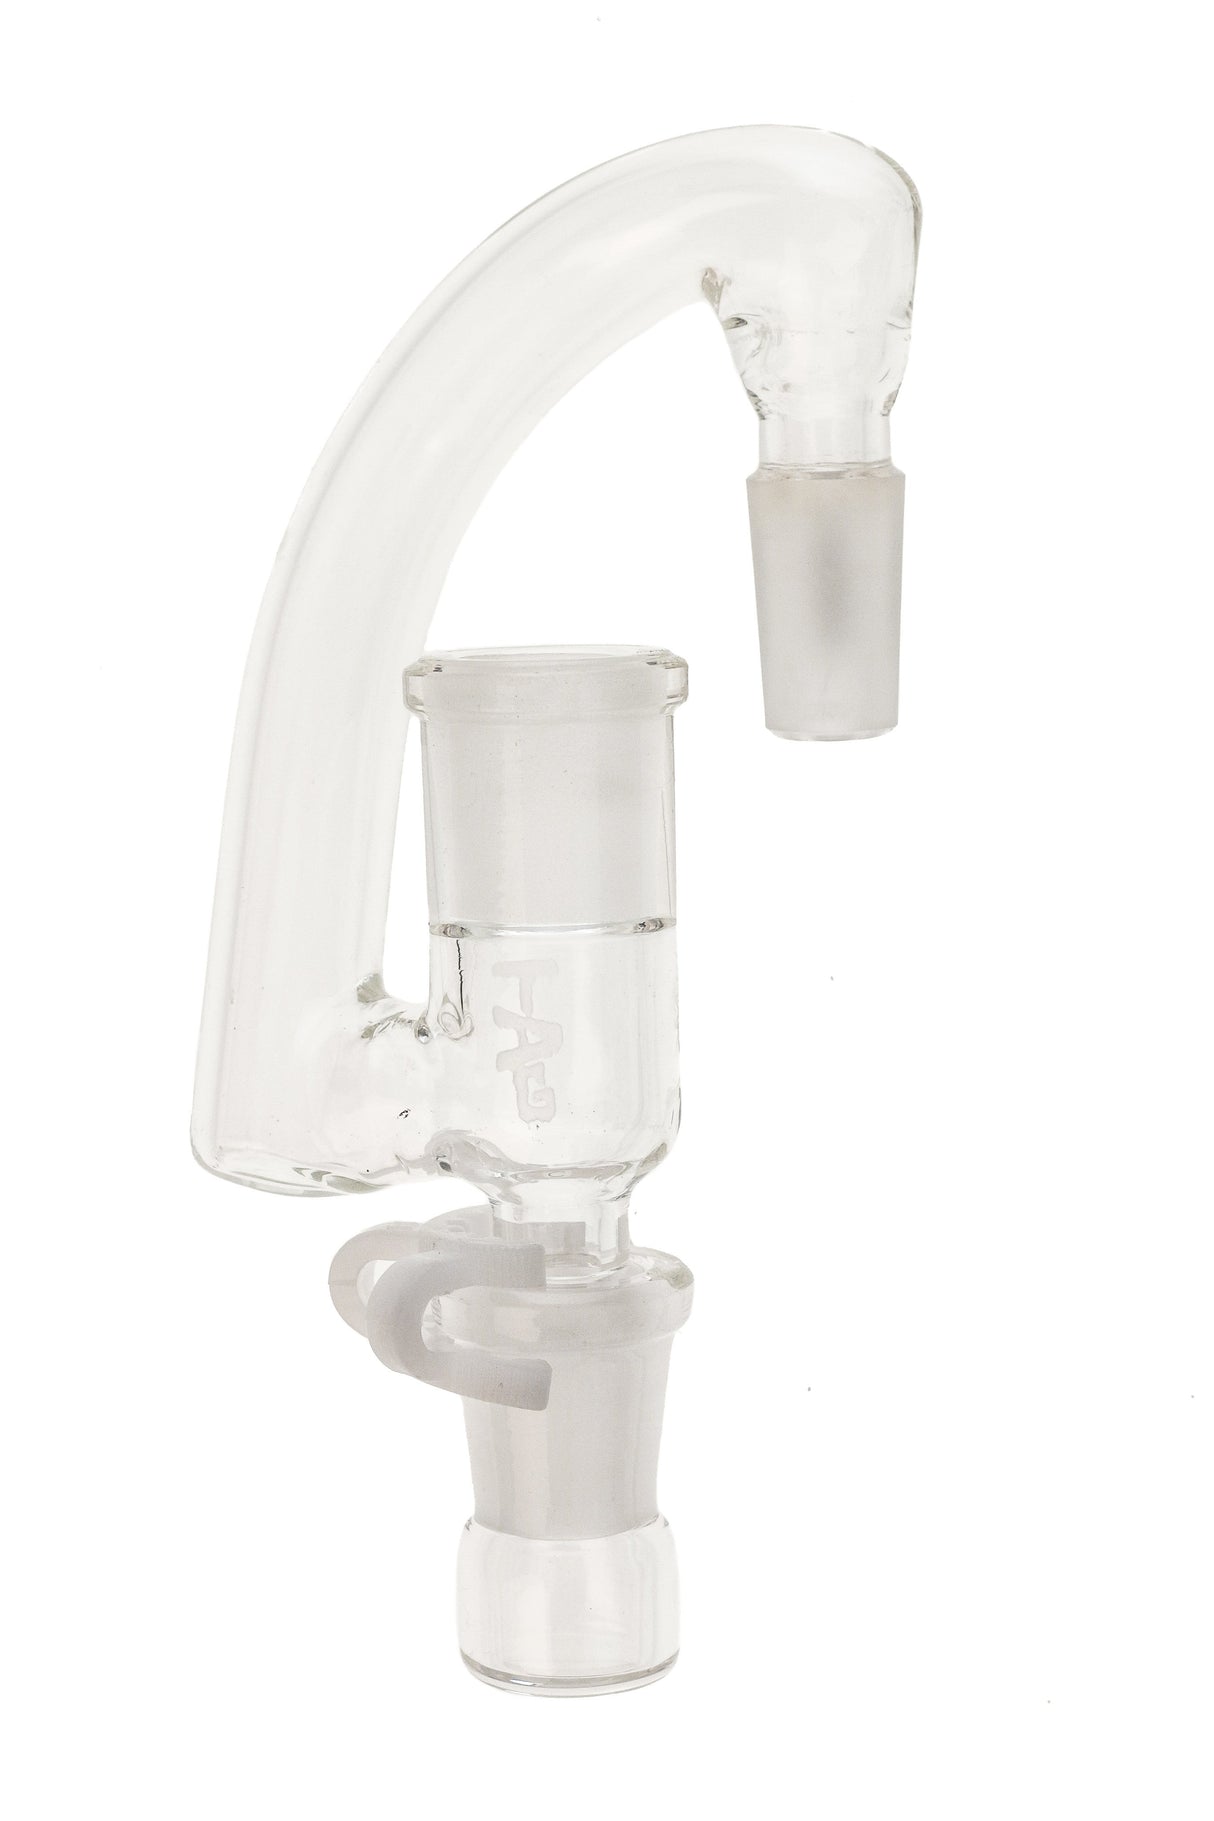 TAG Reclaim Drop Down Adapter with 0.5" Drop, Male-Female Joint 18mm to 14mm, Clear Glass, Side View